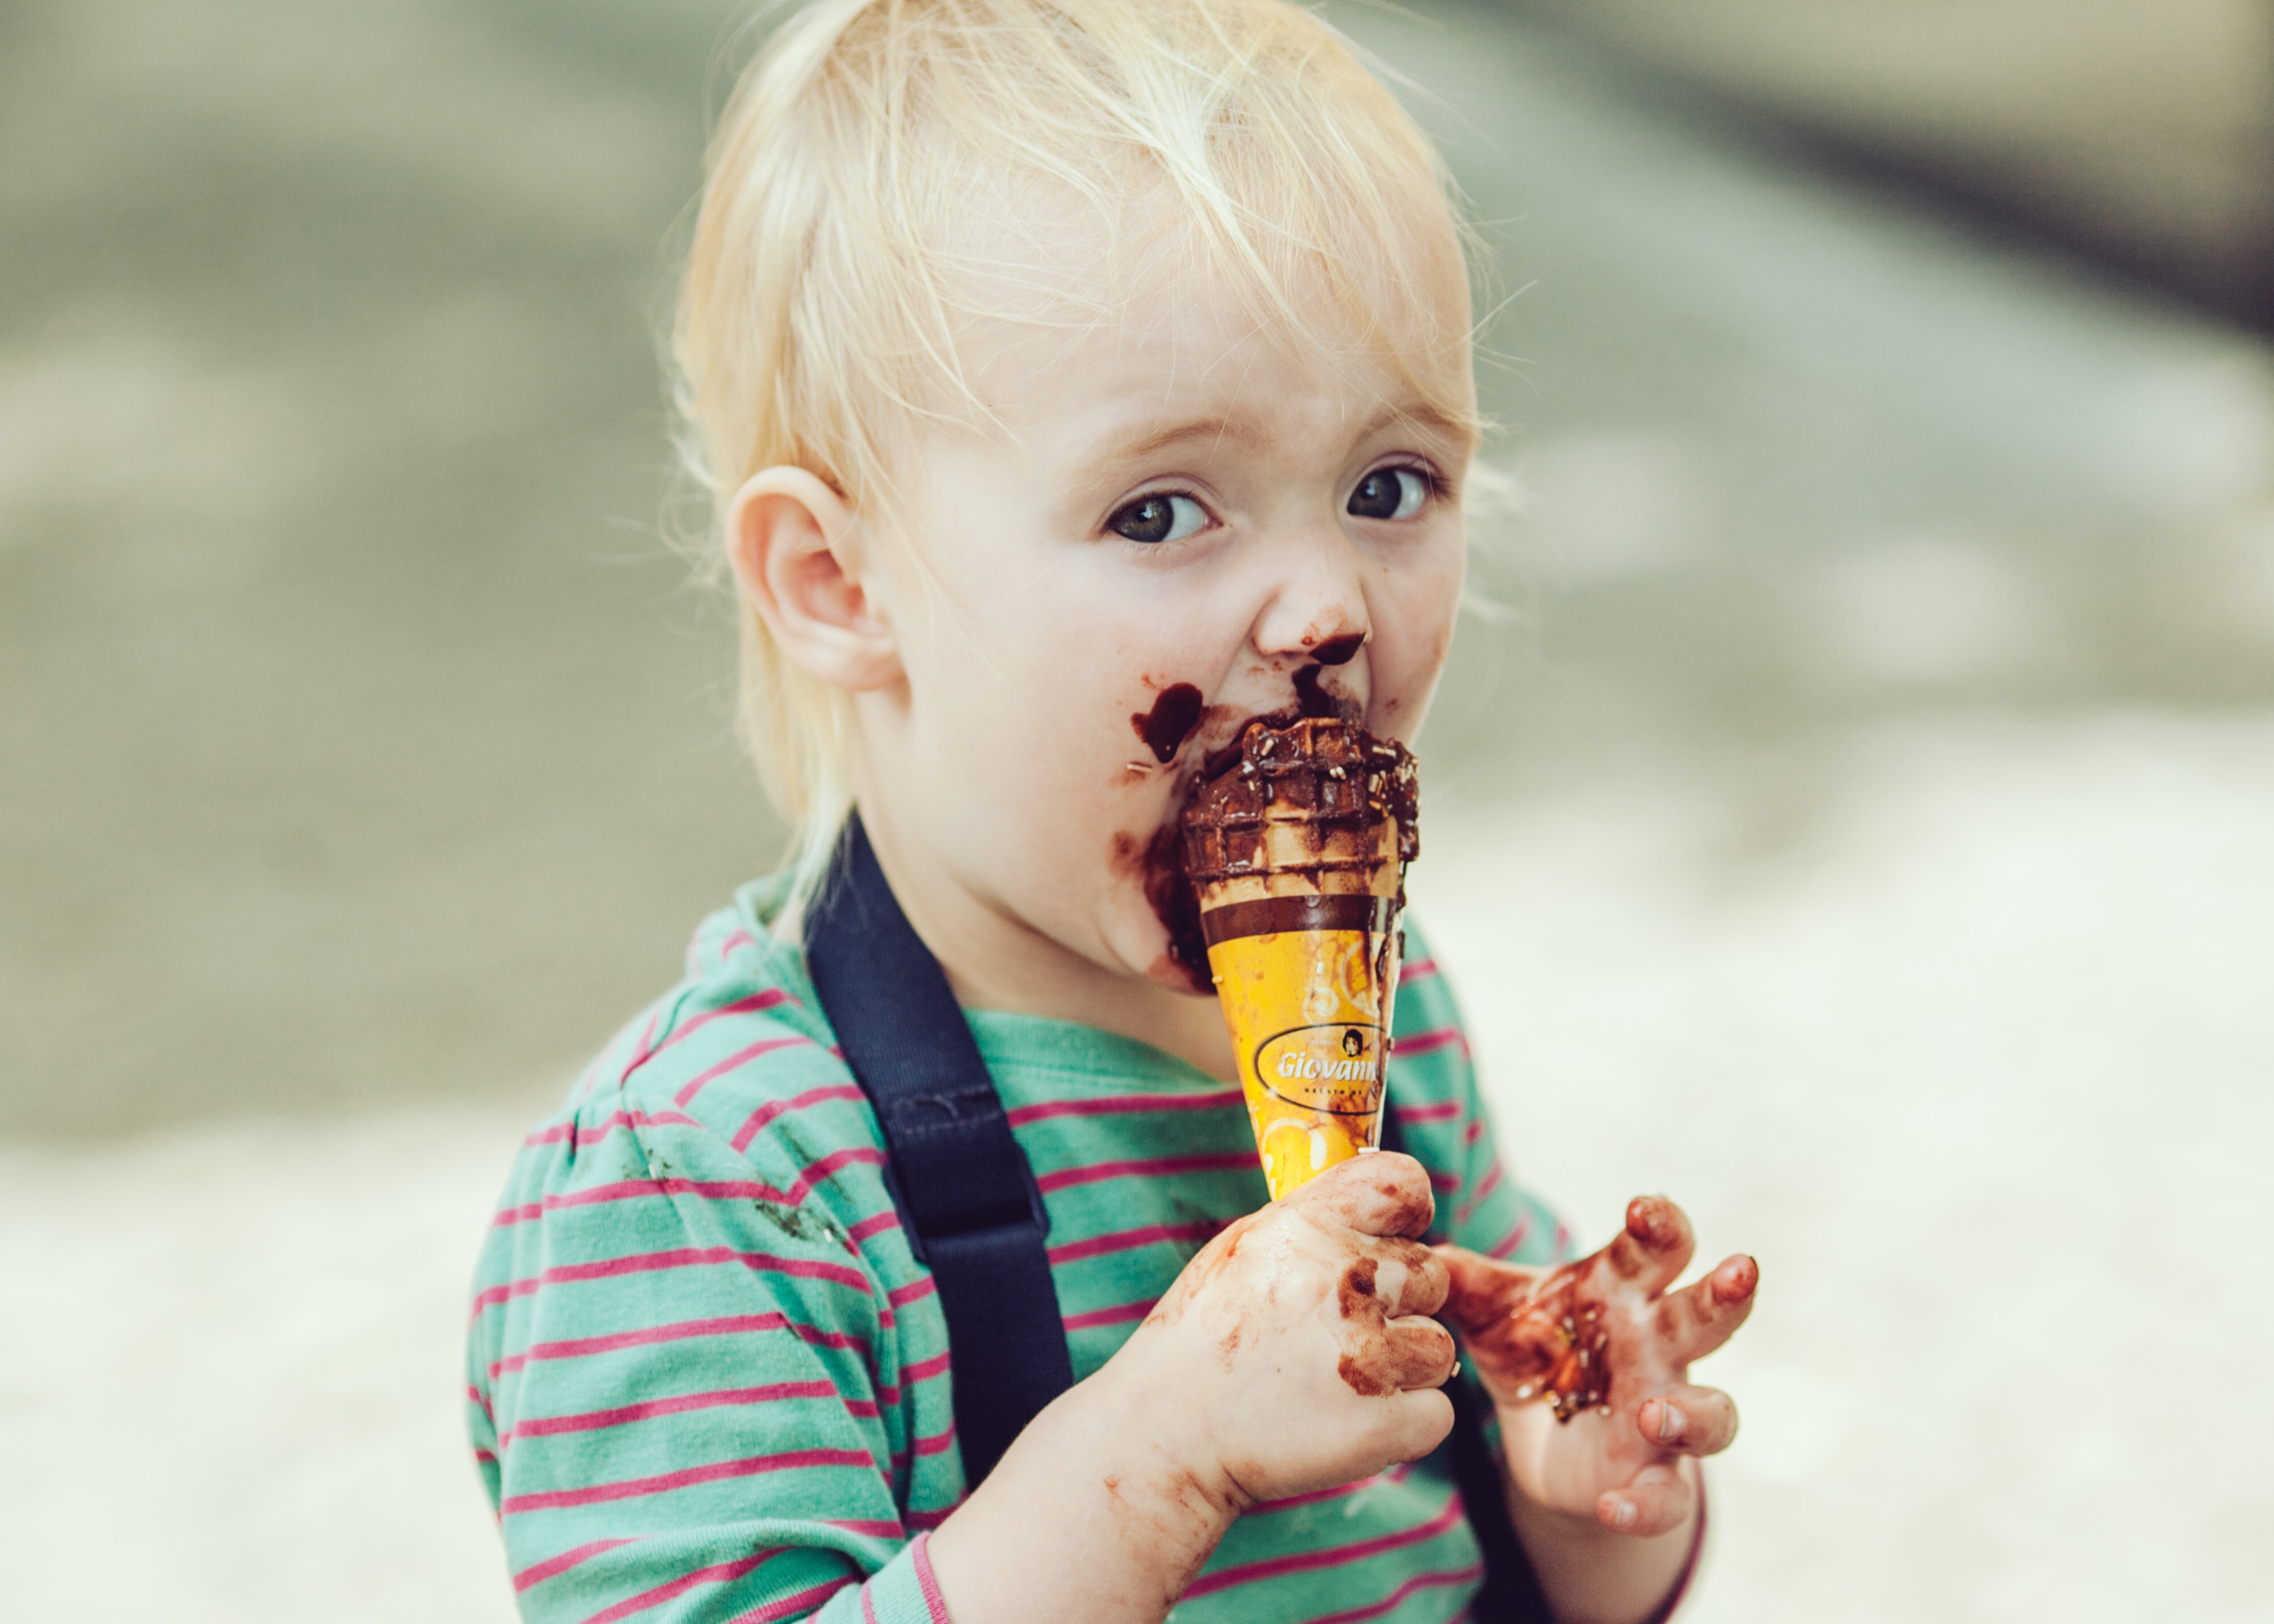 Food Glorious Food – How sensory processing influences your child’s feeding and mealtime skills.